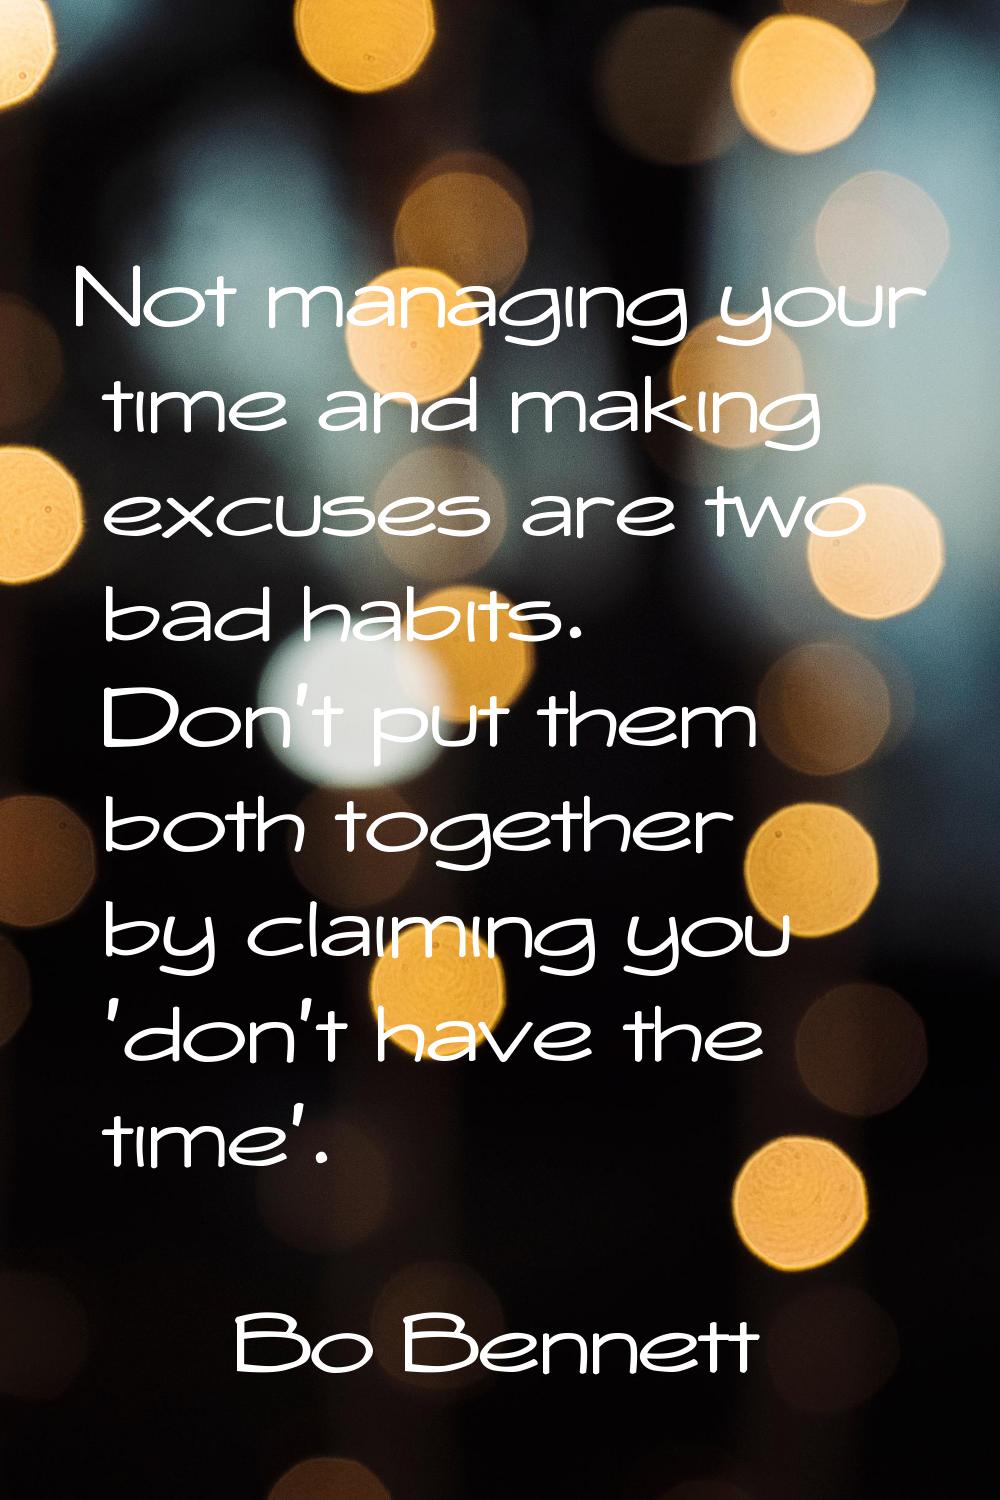 Not managing your time and making excuses are two bad habits. Don't put them both together by claim